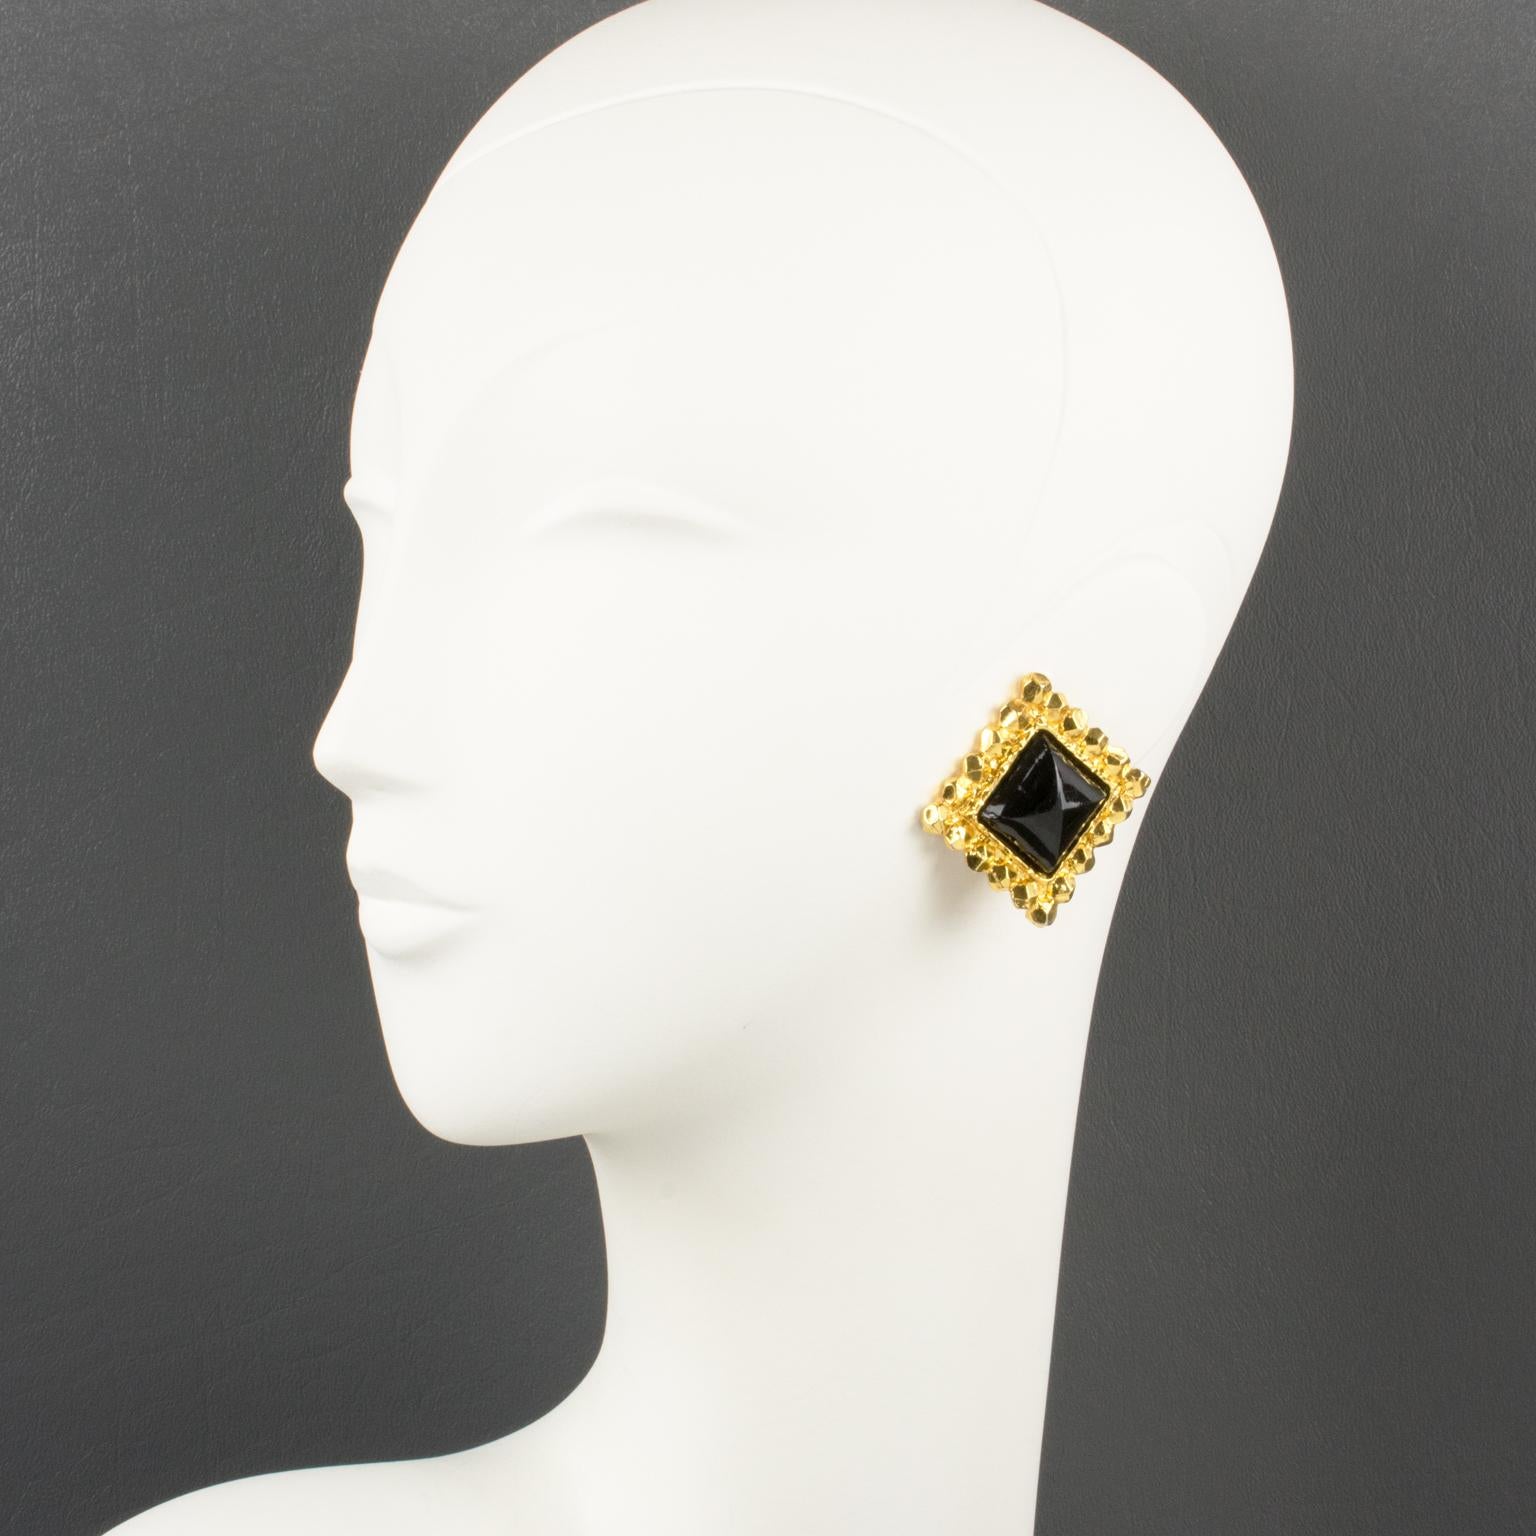 Lovely oversized Edouard Rambaud Paris signed clip-on earrings. Geometric dimensional design with a gilt metal square framing in shiny finish aspect topped with resin cabochon in licorice black color. Signed underside: 